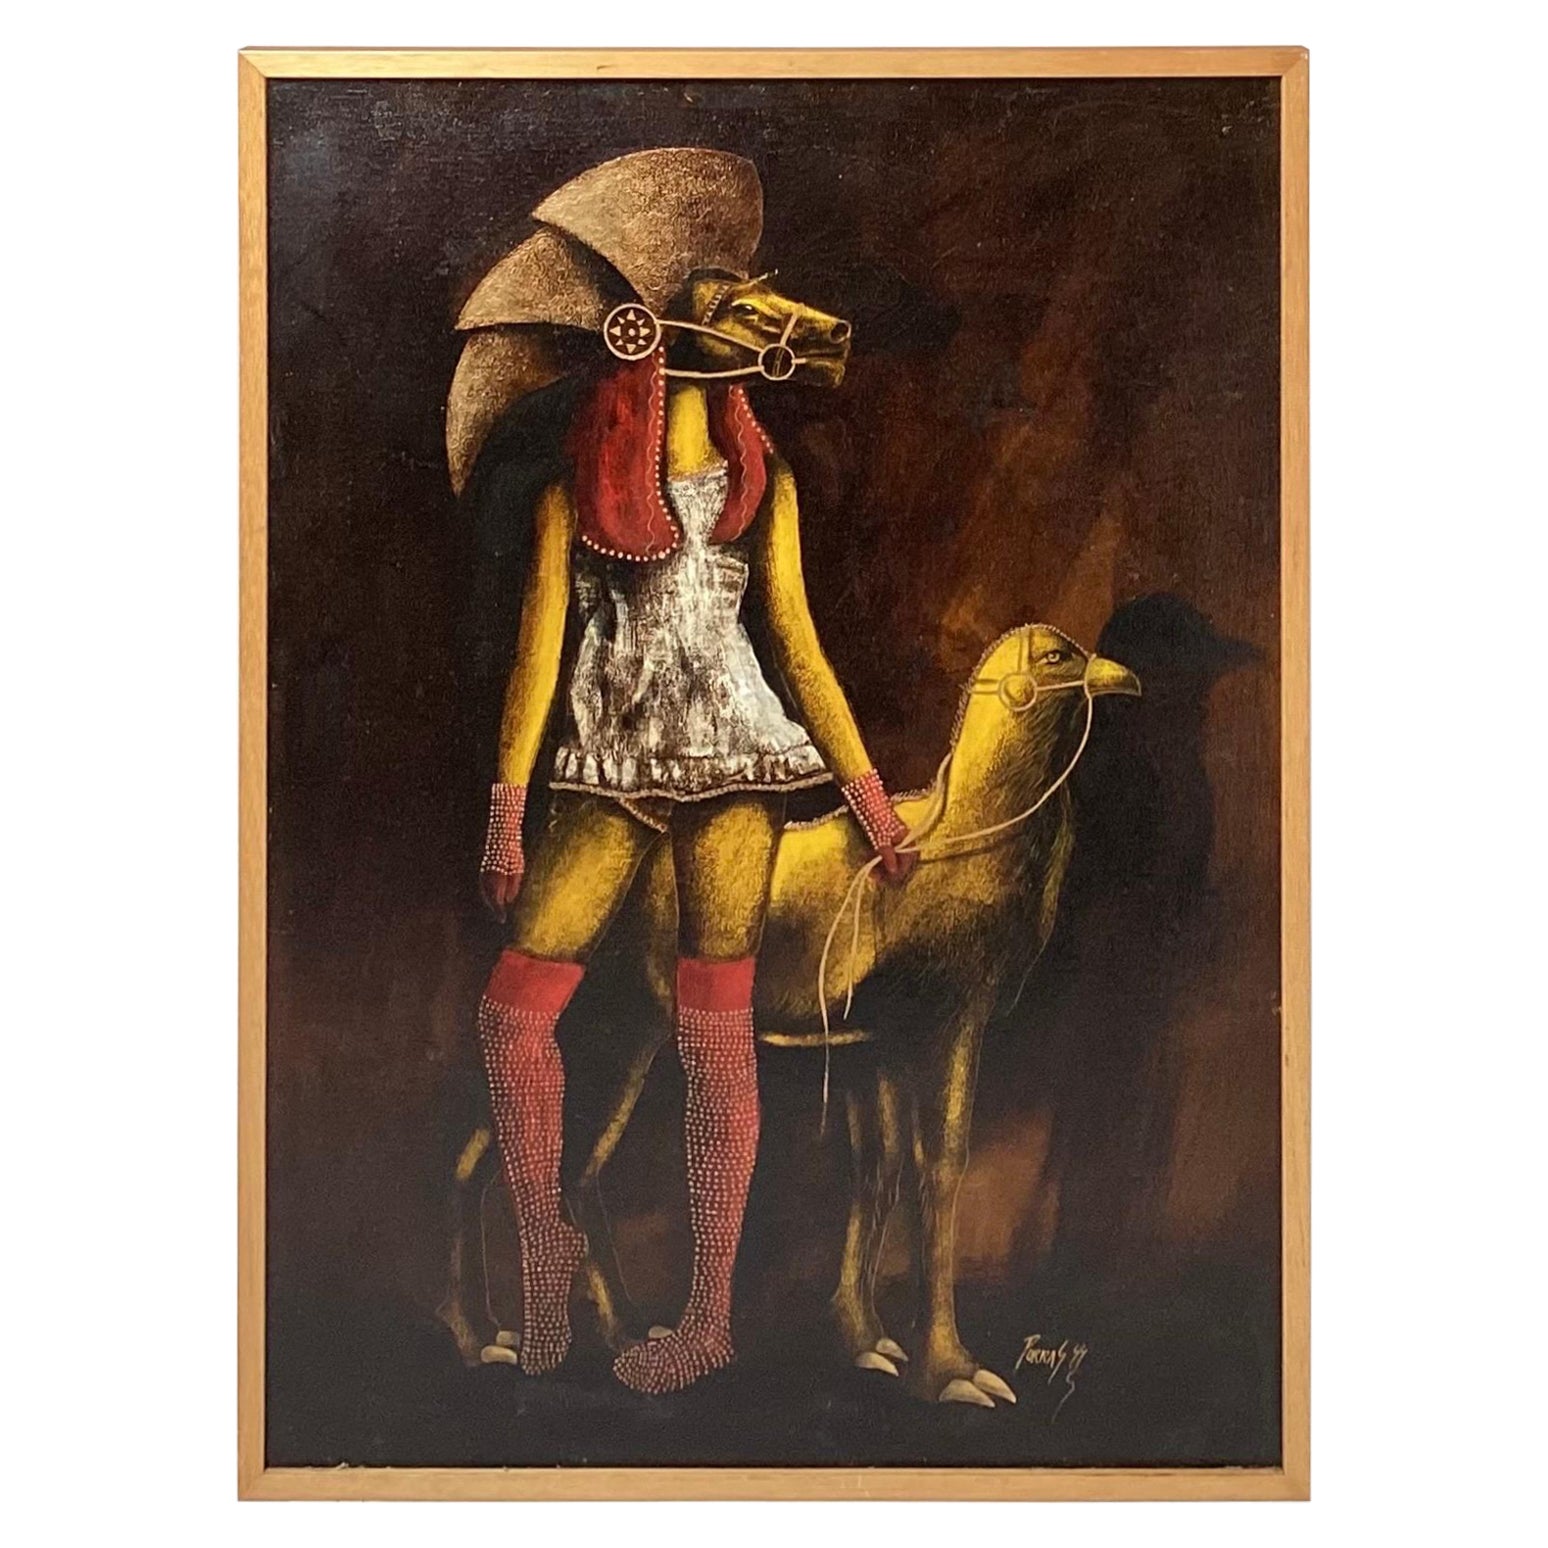 Surrealist Oil Painting of a Woman with Horsehead Helmet